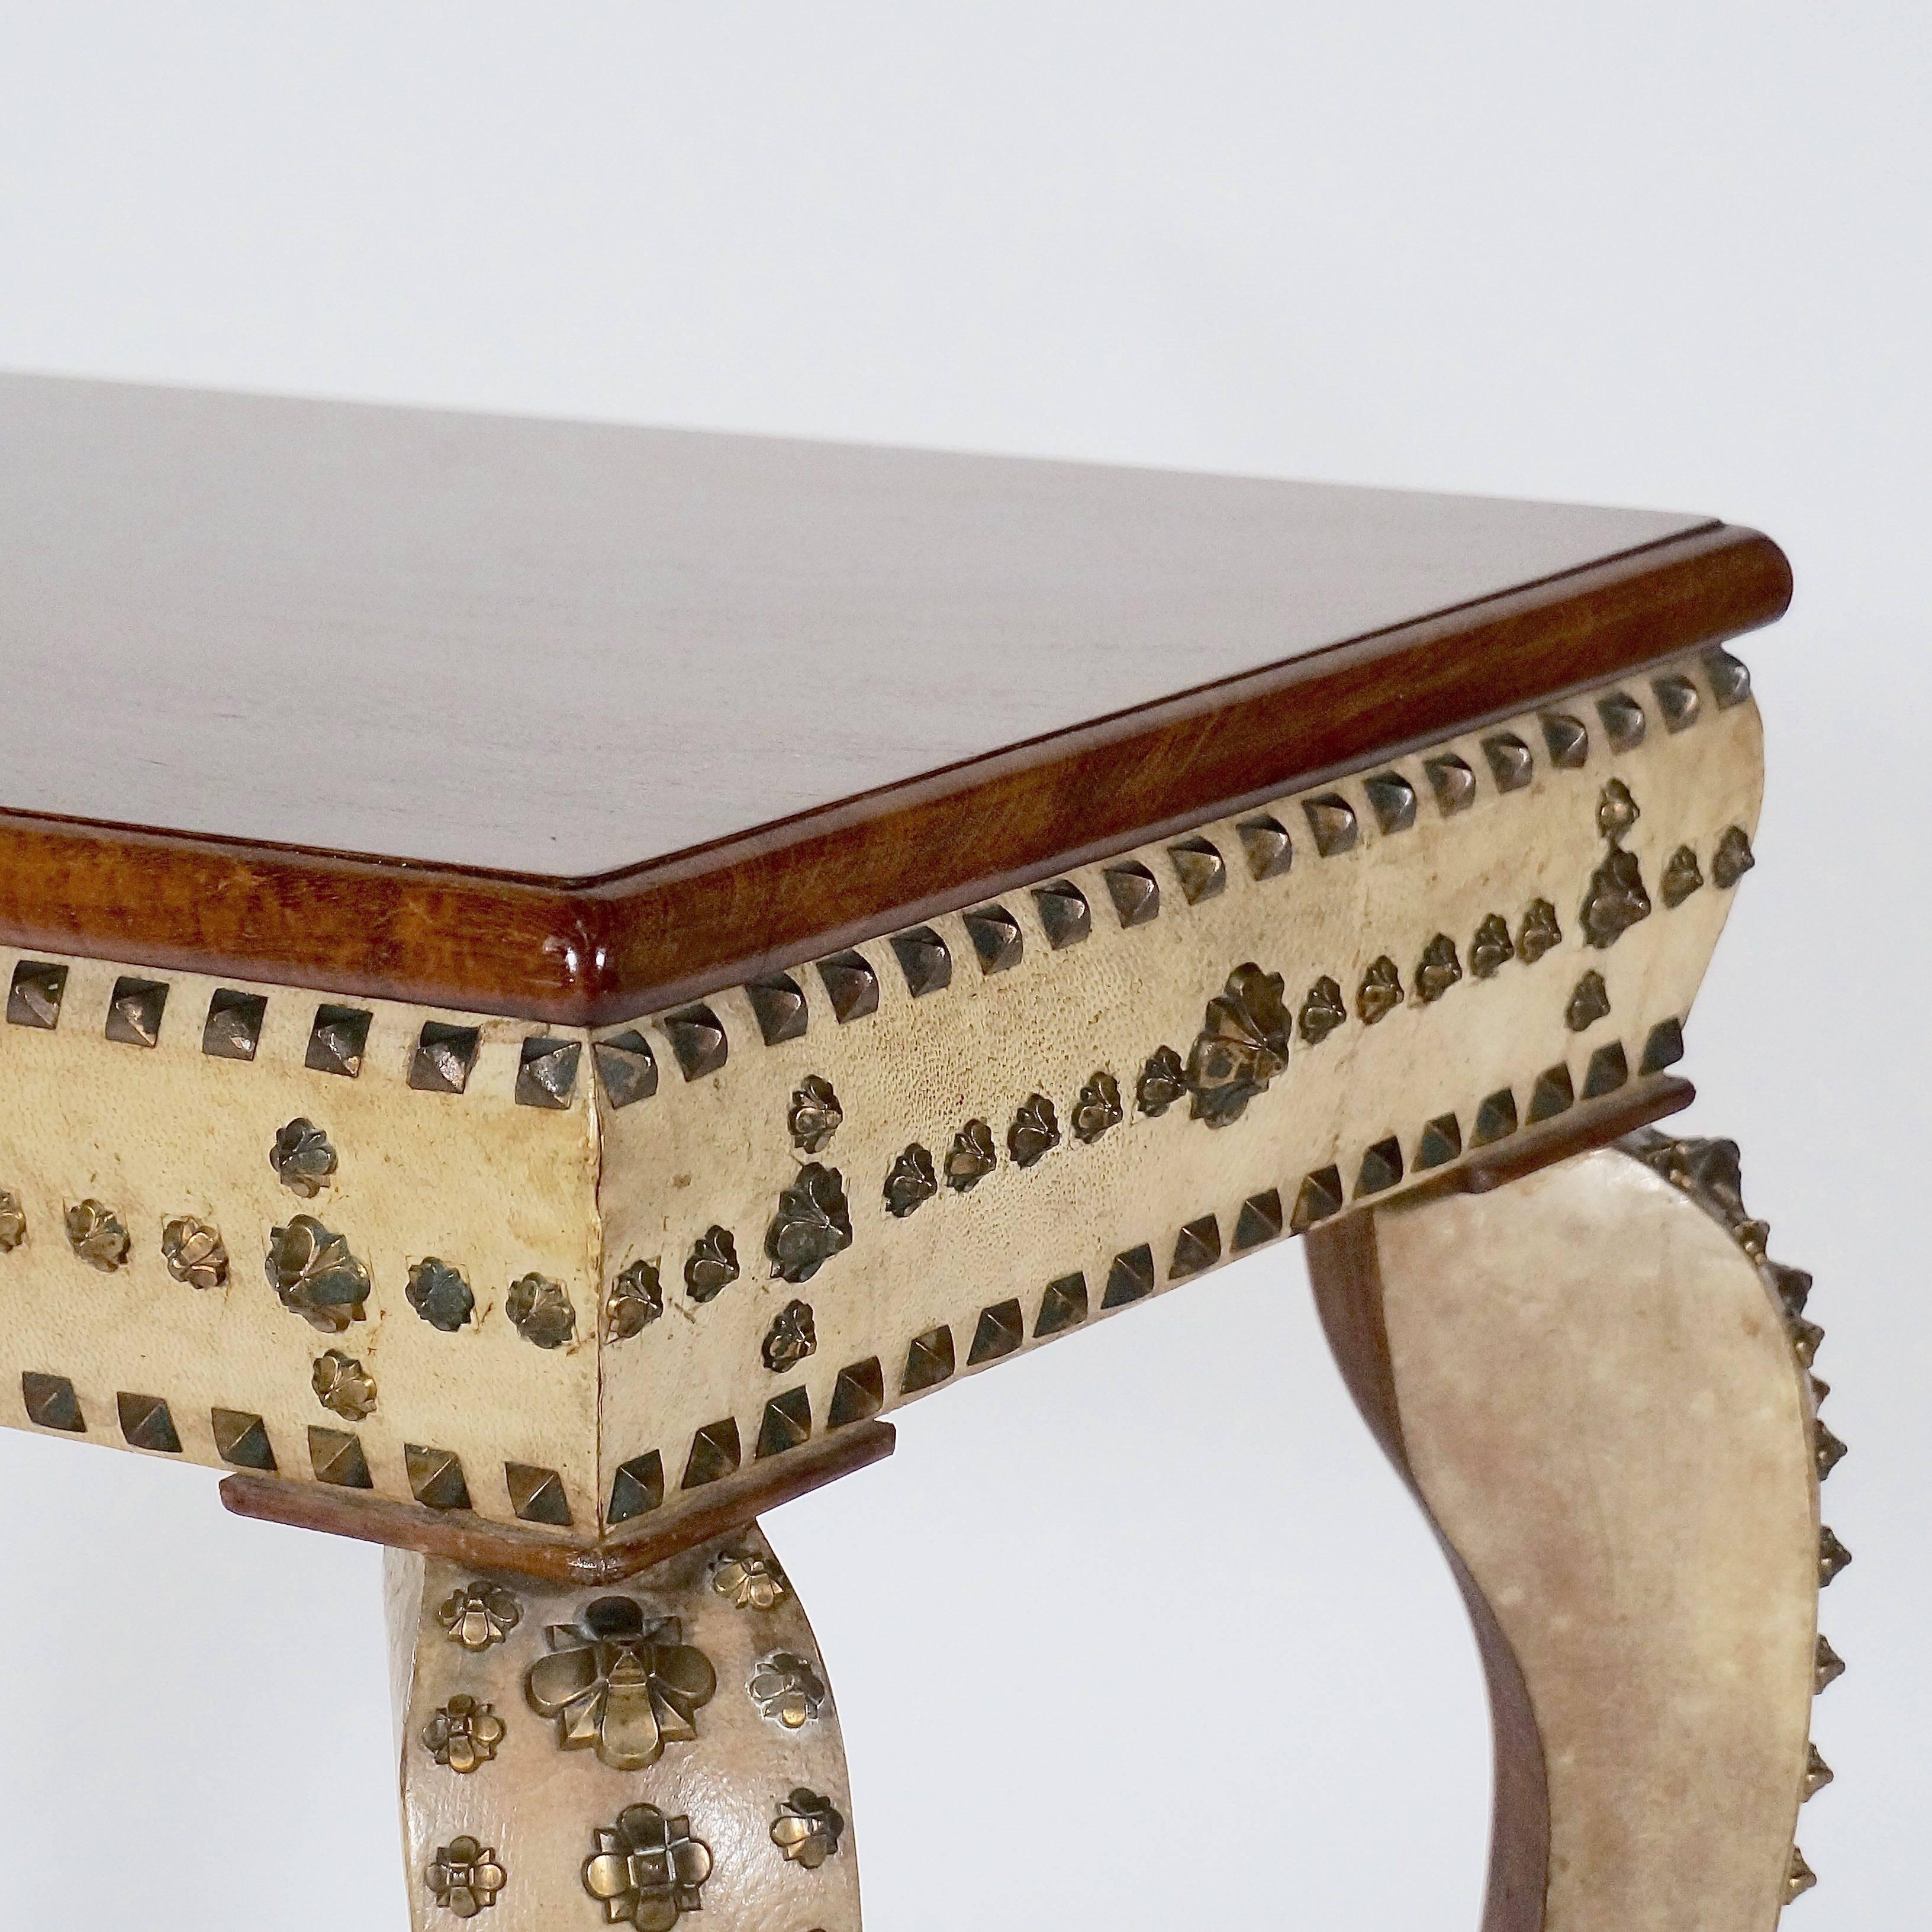 Spanish Vellum Covered Side Table with a Walnut Top